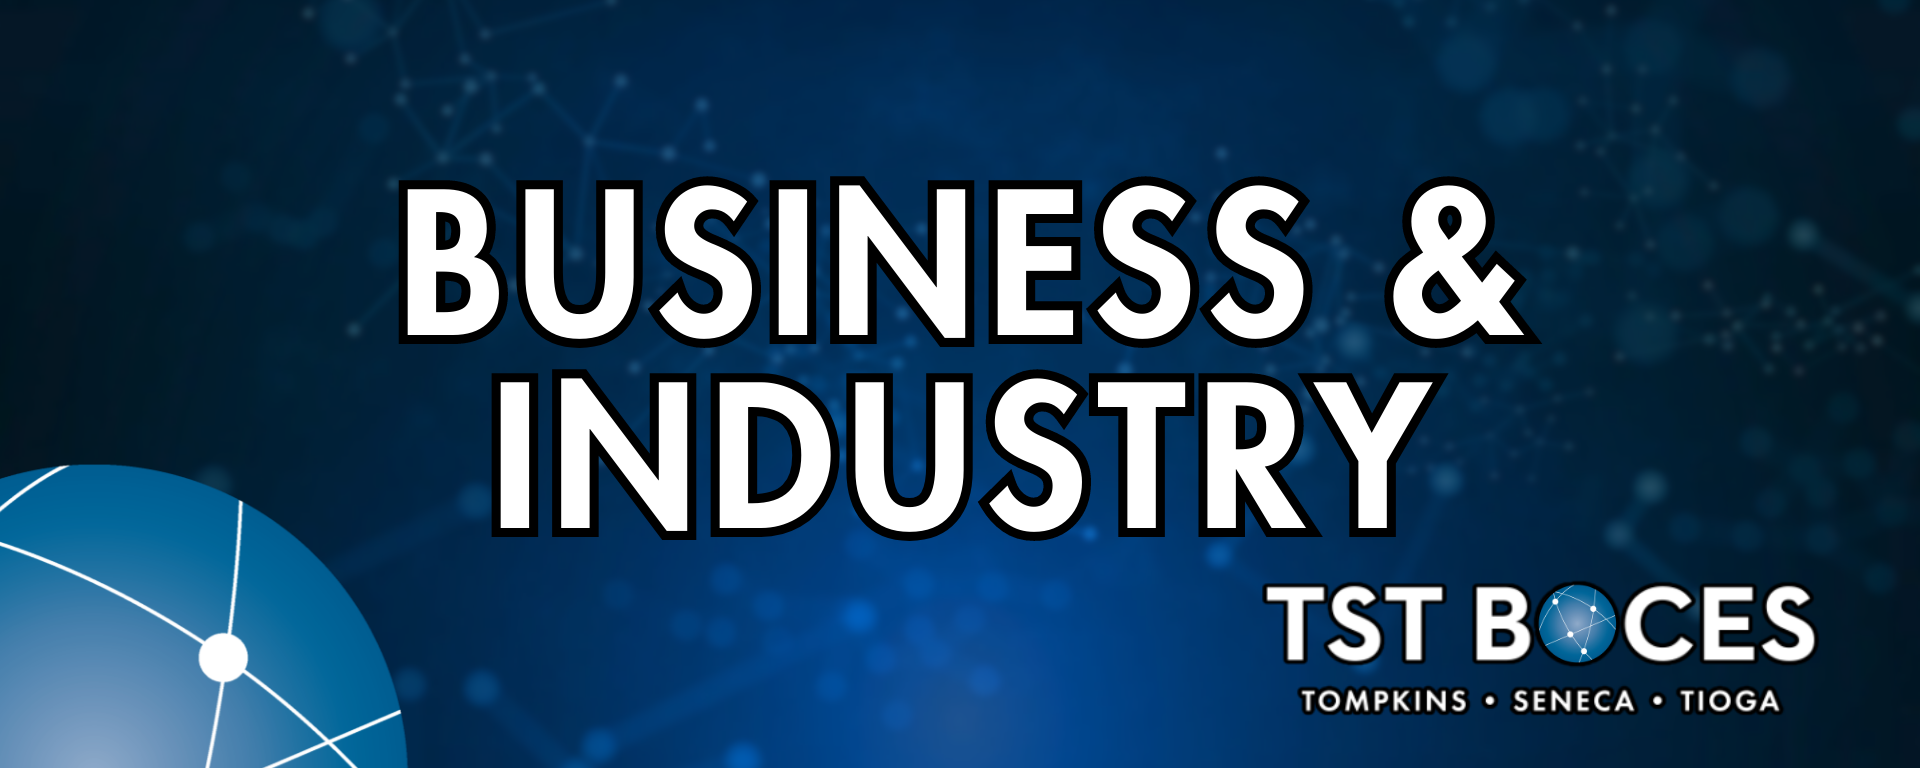 BUSINESS & INDUSTRY BANNER